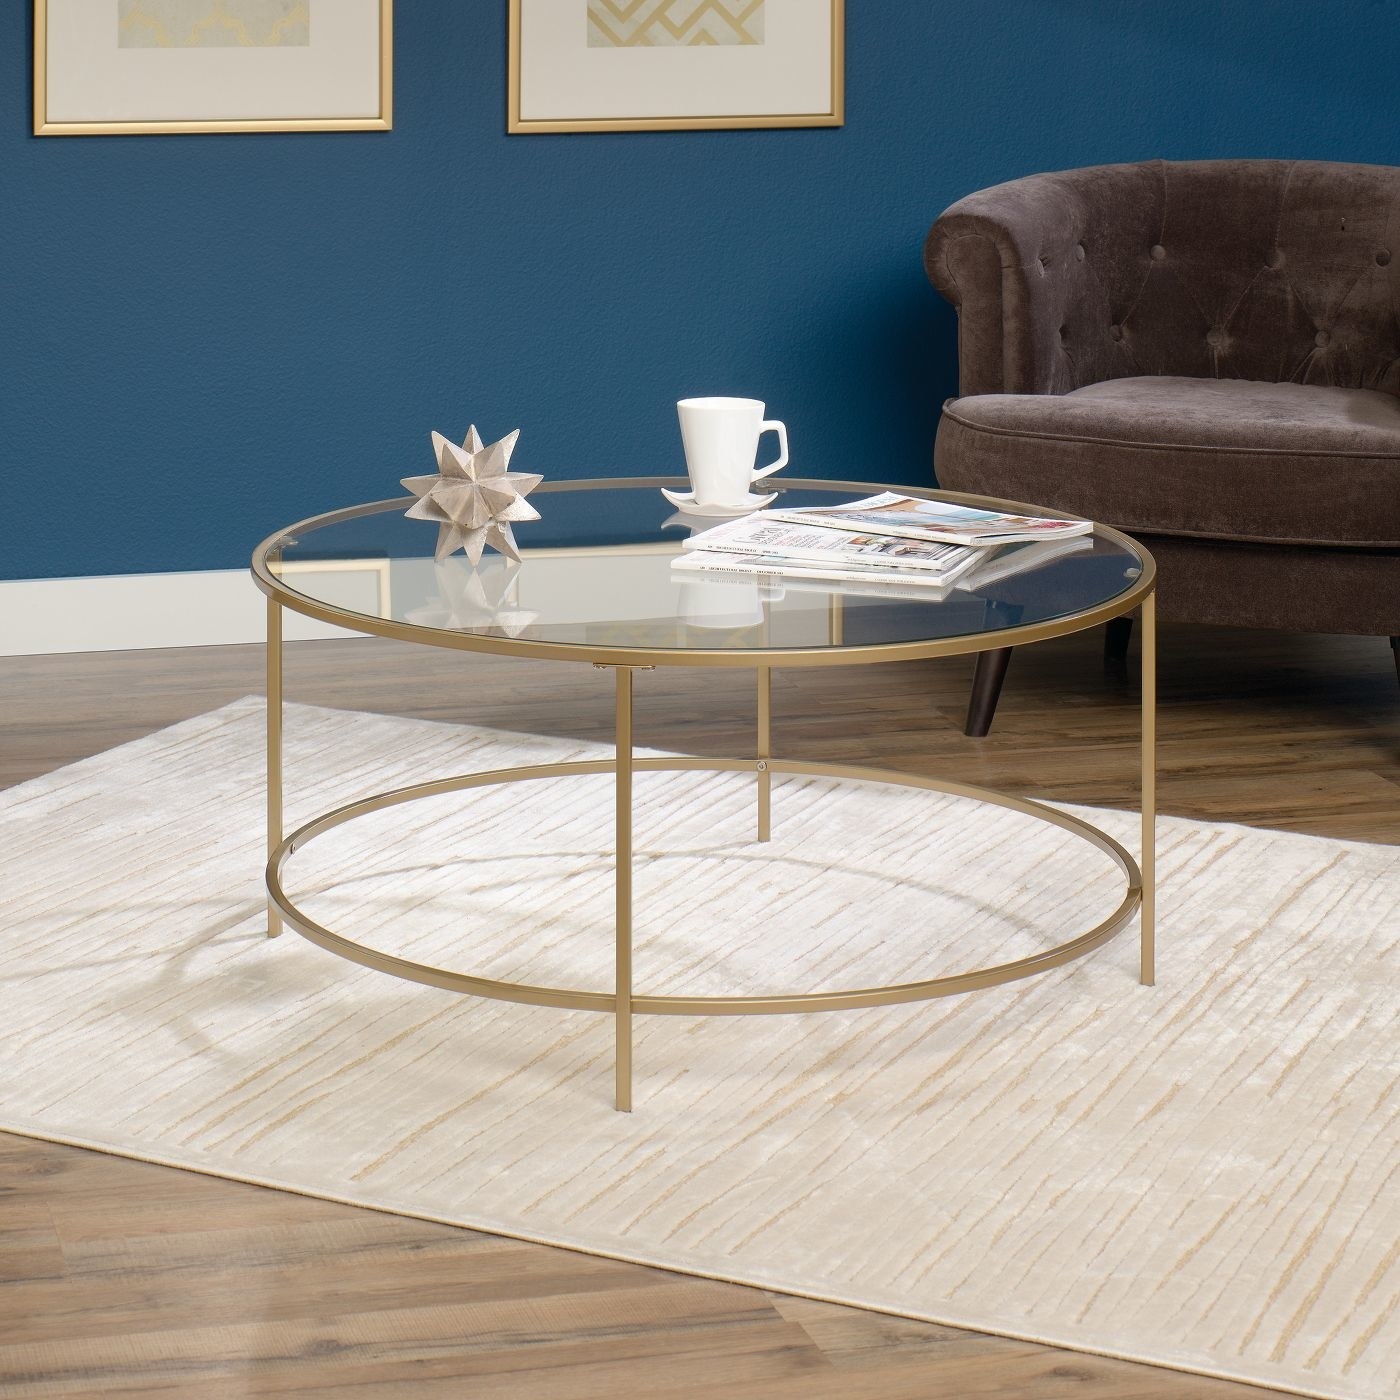 The circular coffee table styled in a room